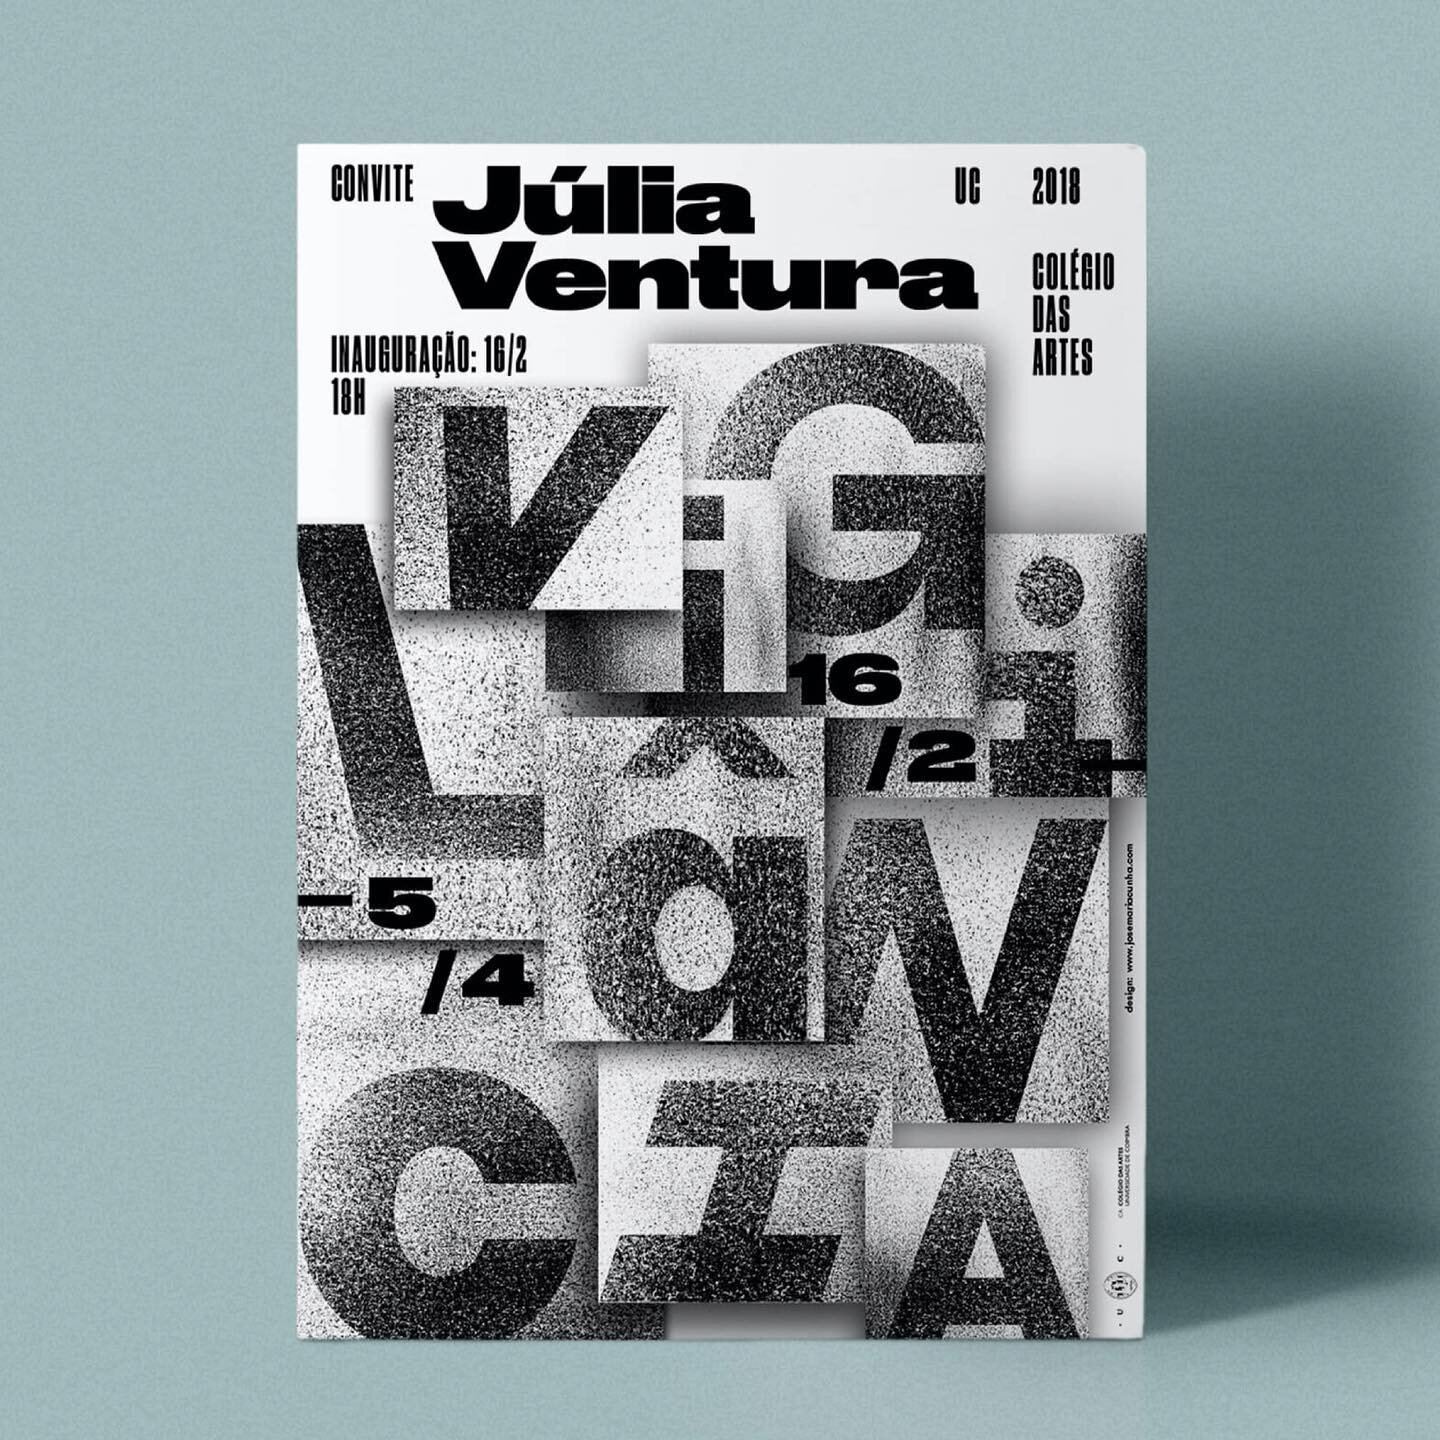 Surveillance &ndash; Vigilância, in Portuguese &ndash; is the exhibition of contemporary artist Júlia Ventura, in the College of the Arts of the University of Coimbra.

We were very happy to do the identity for the event, such as this invitation po